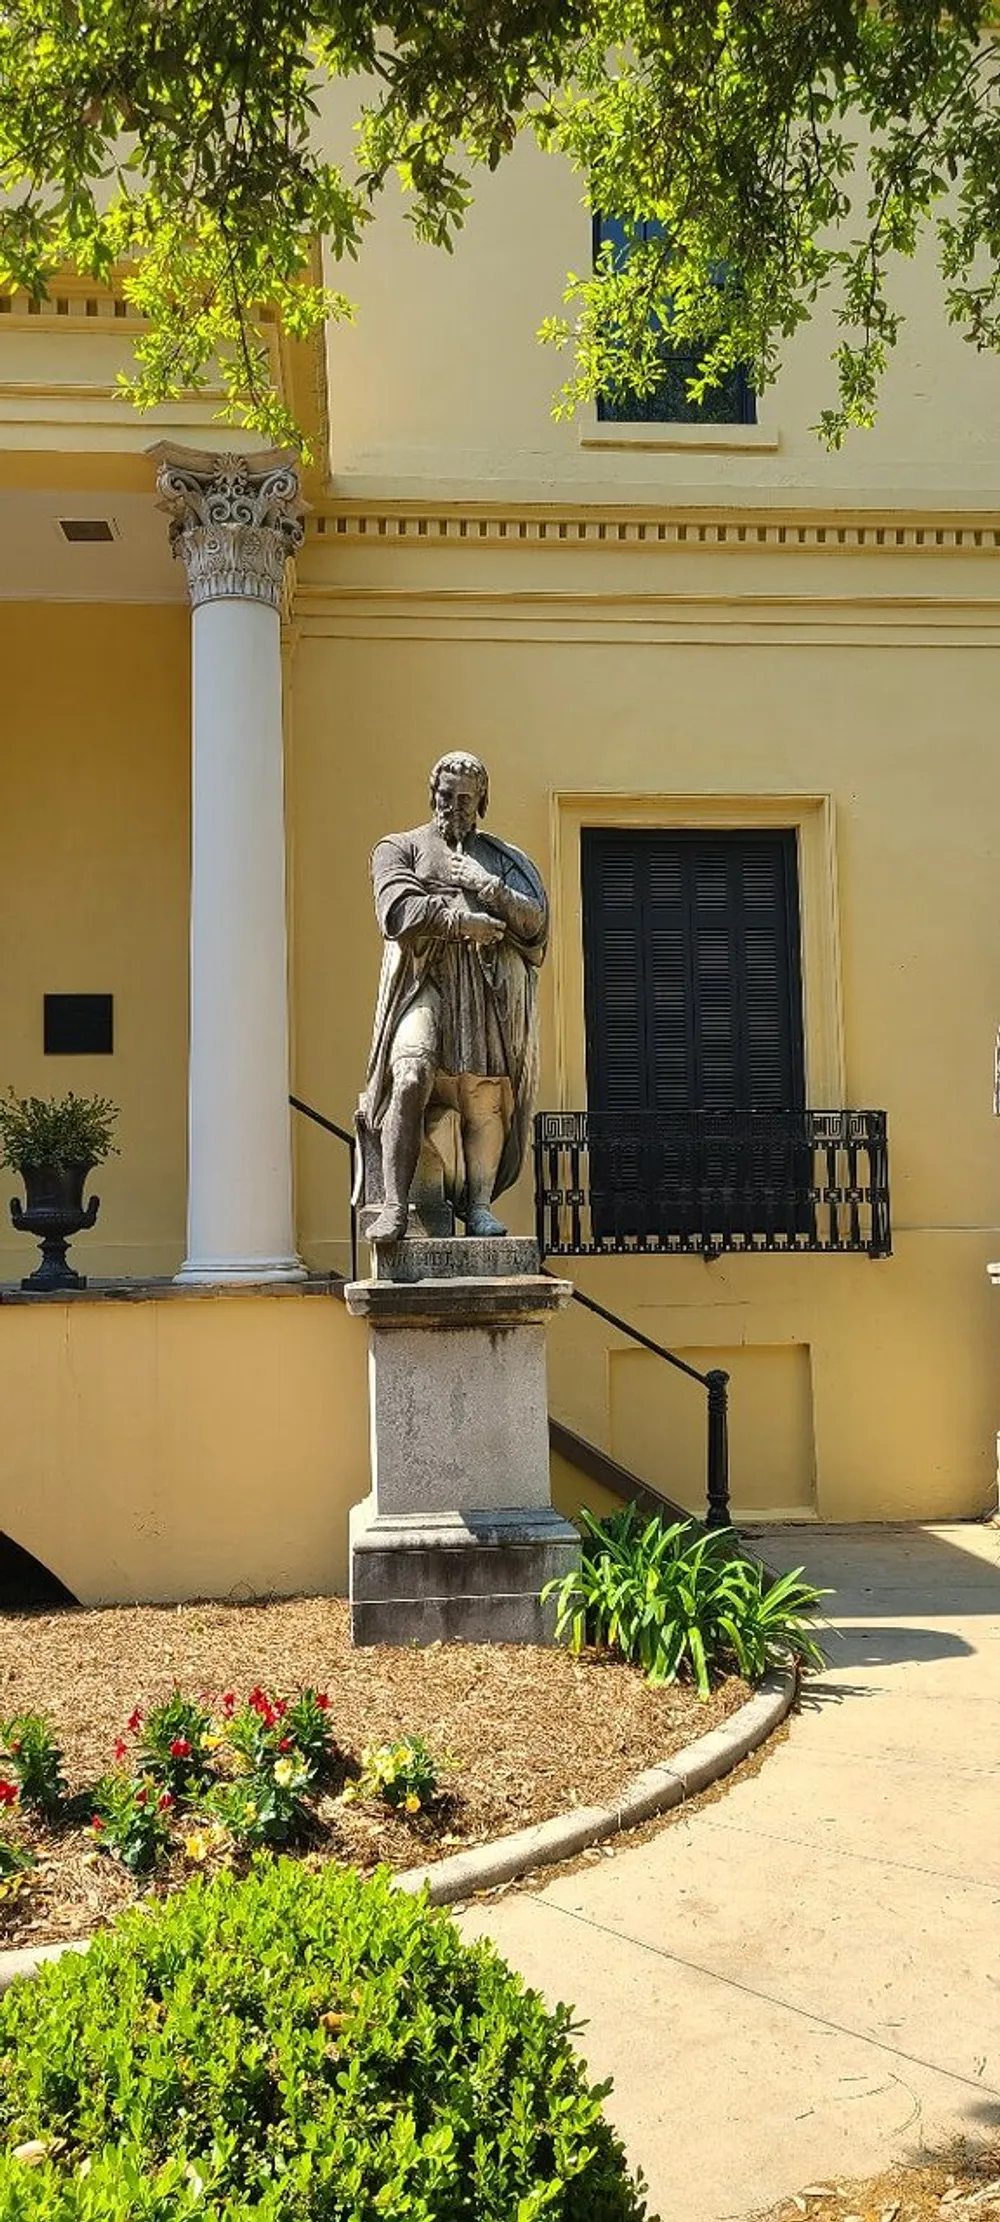 The image shows a stone statue of a bearded figure with a contemplative expression standing in front of a classical building with a column a balcony and greenery